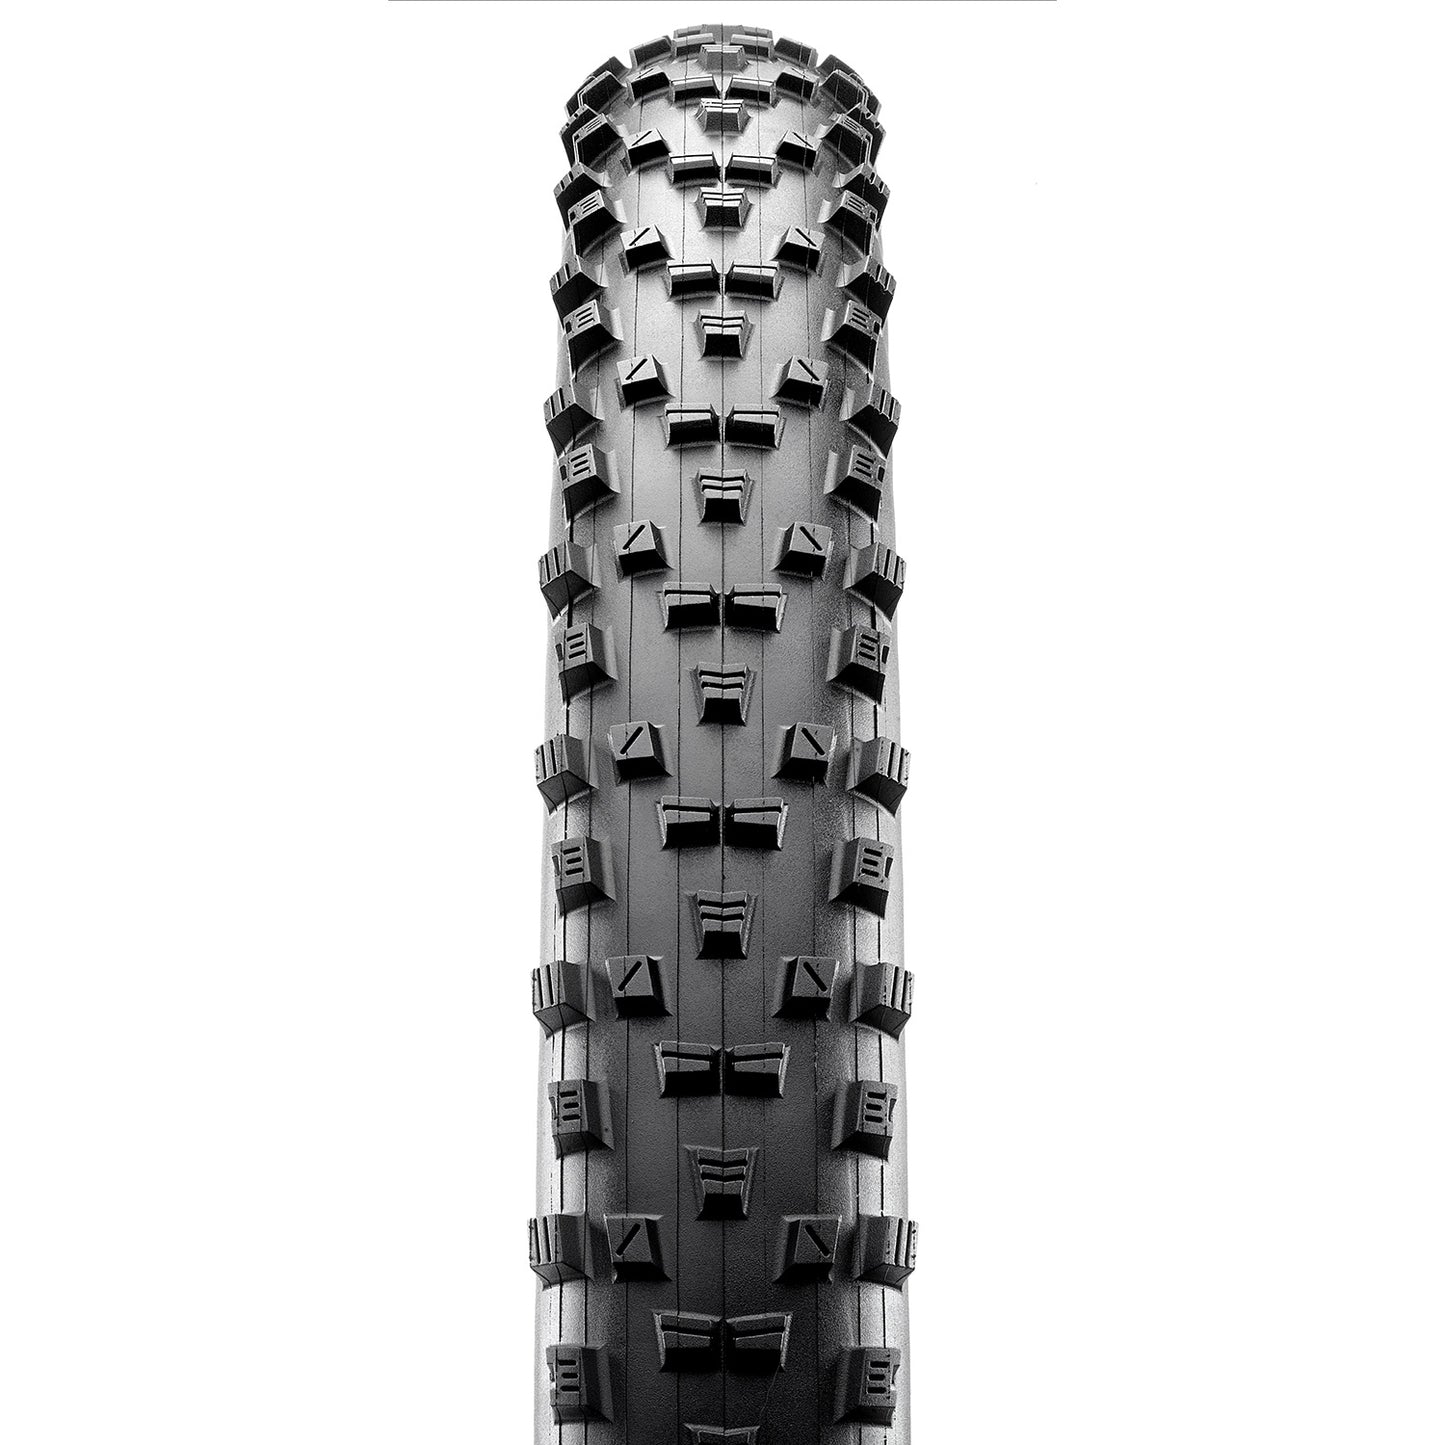 Maxxis Forekaster Tyre - TR Kevlar Folding - EXO - Dual Compound - 2.2 Inch - 27.5 Inch